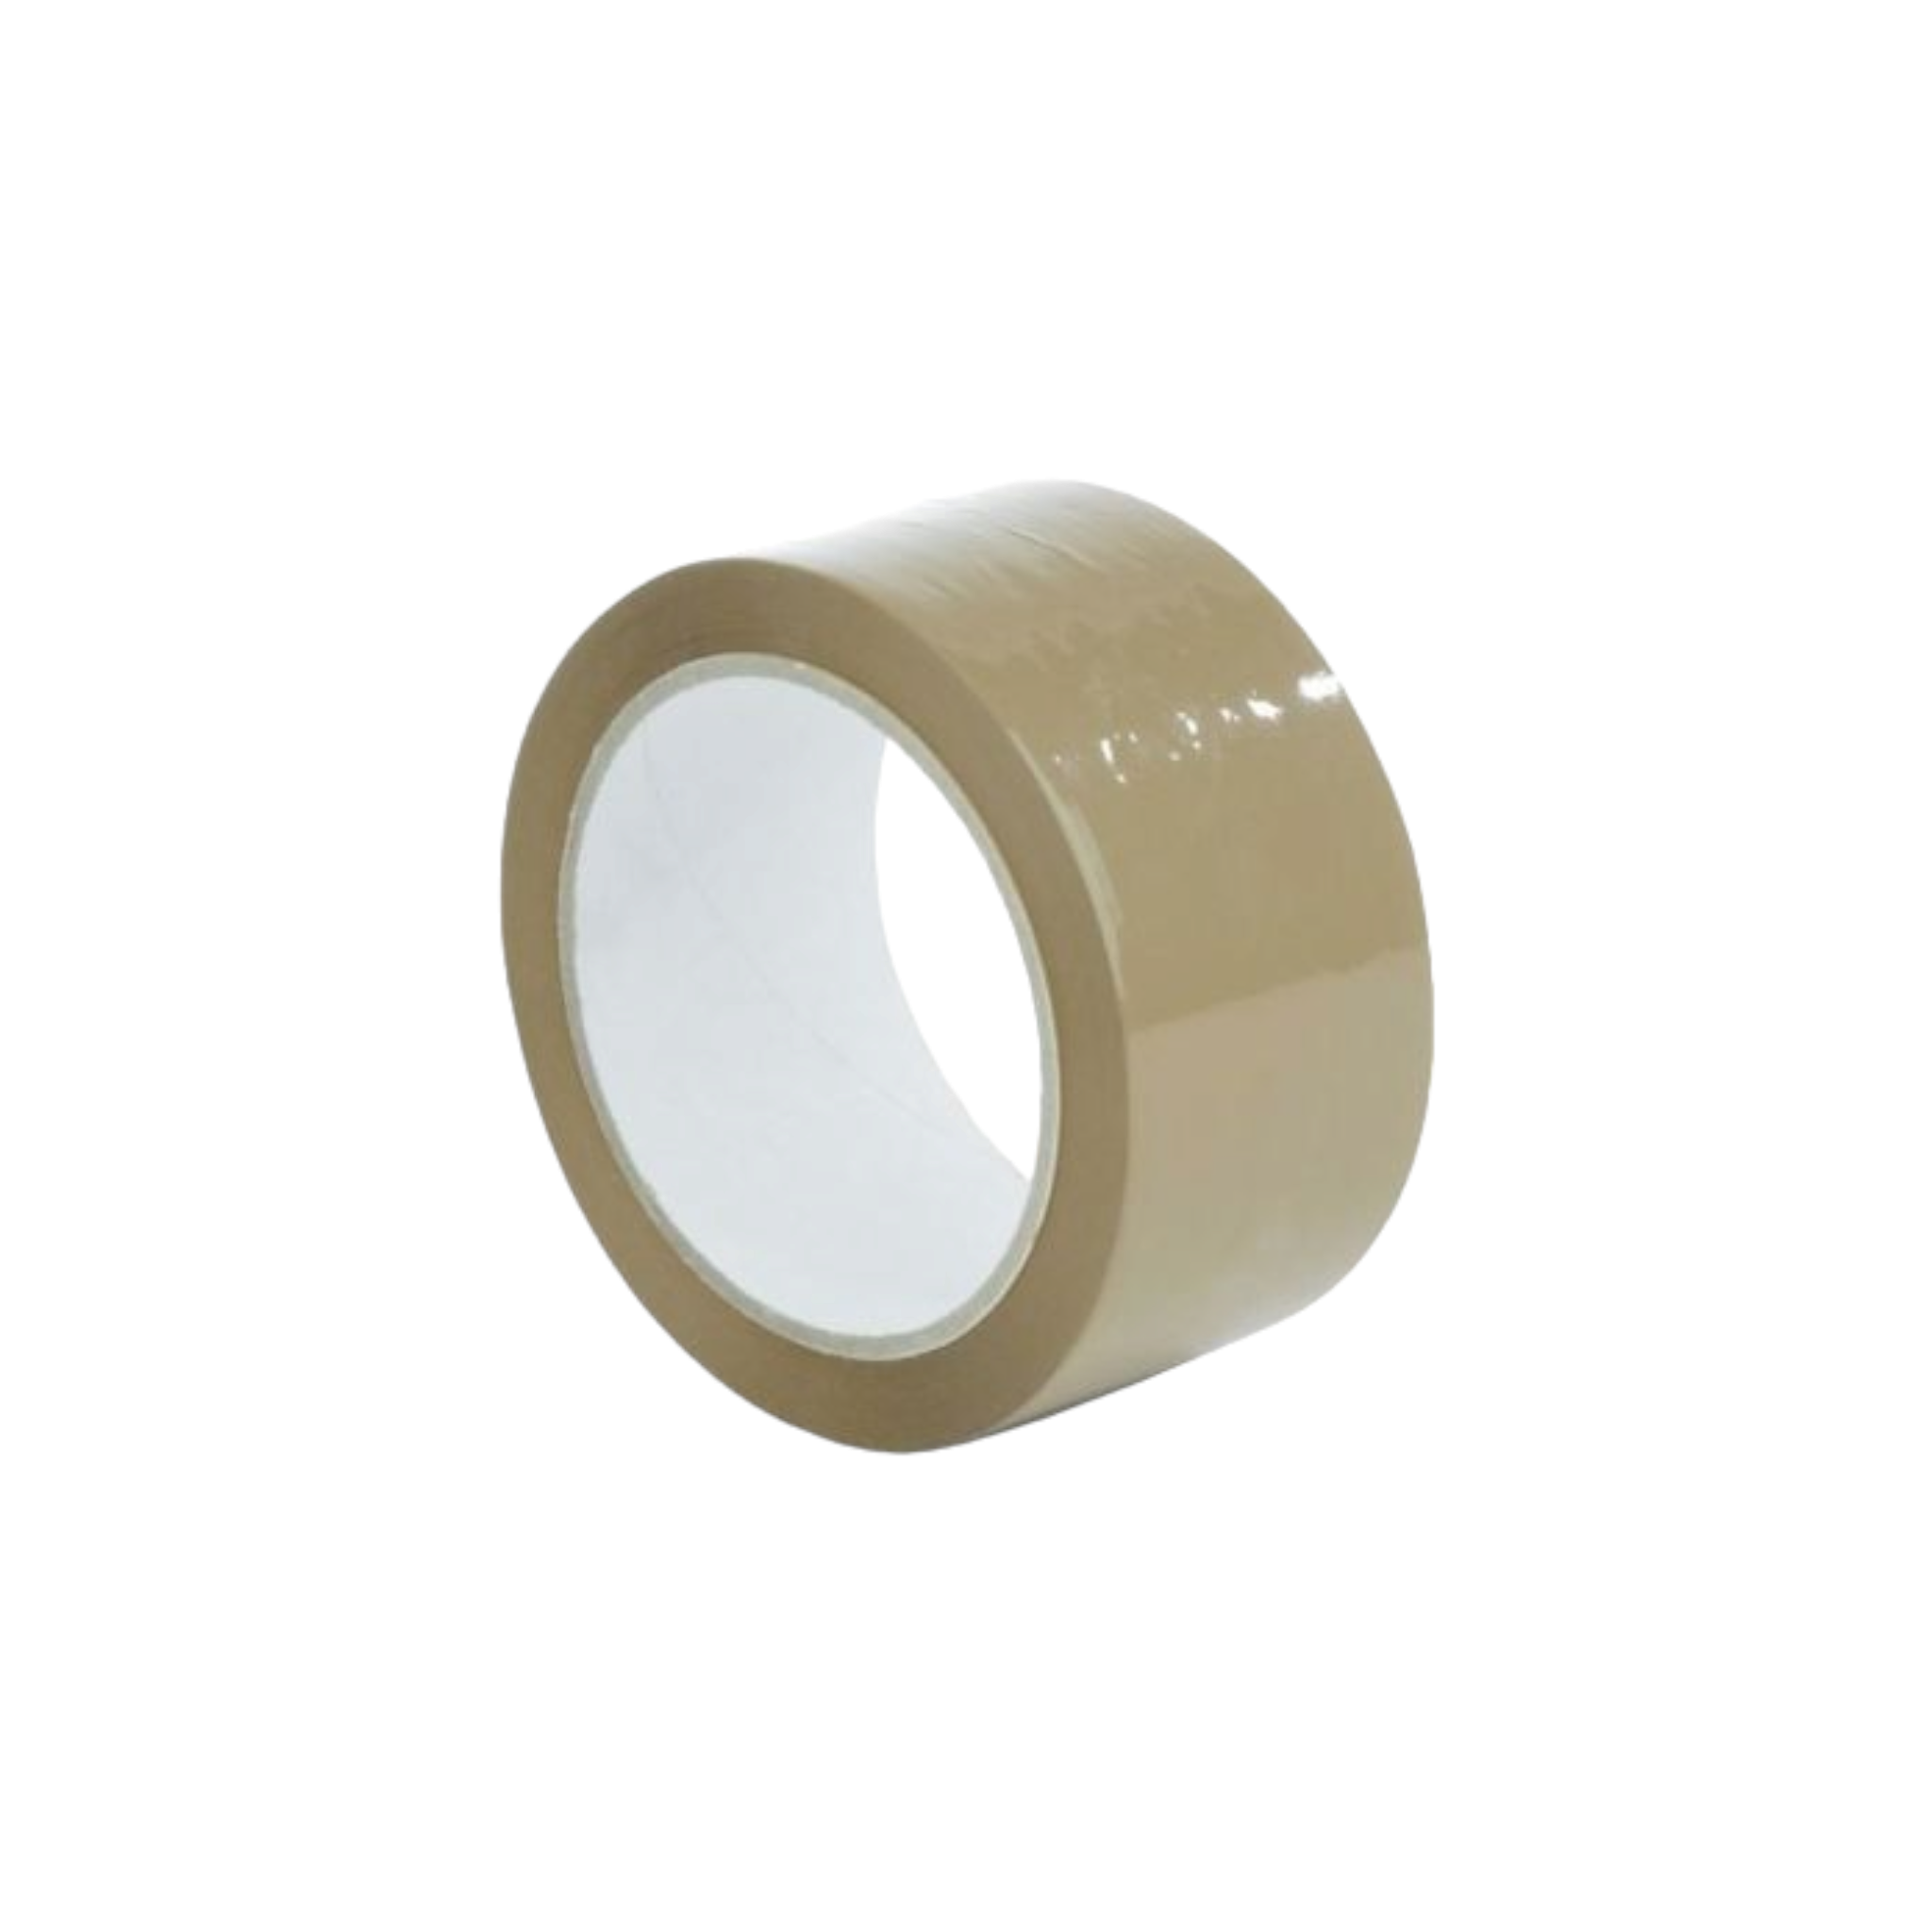 Buff Packaging Tape Brown 48mmx50m W19